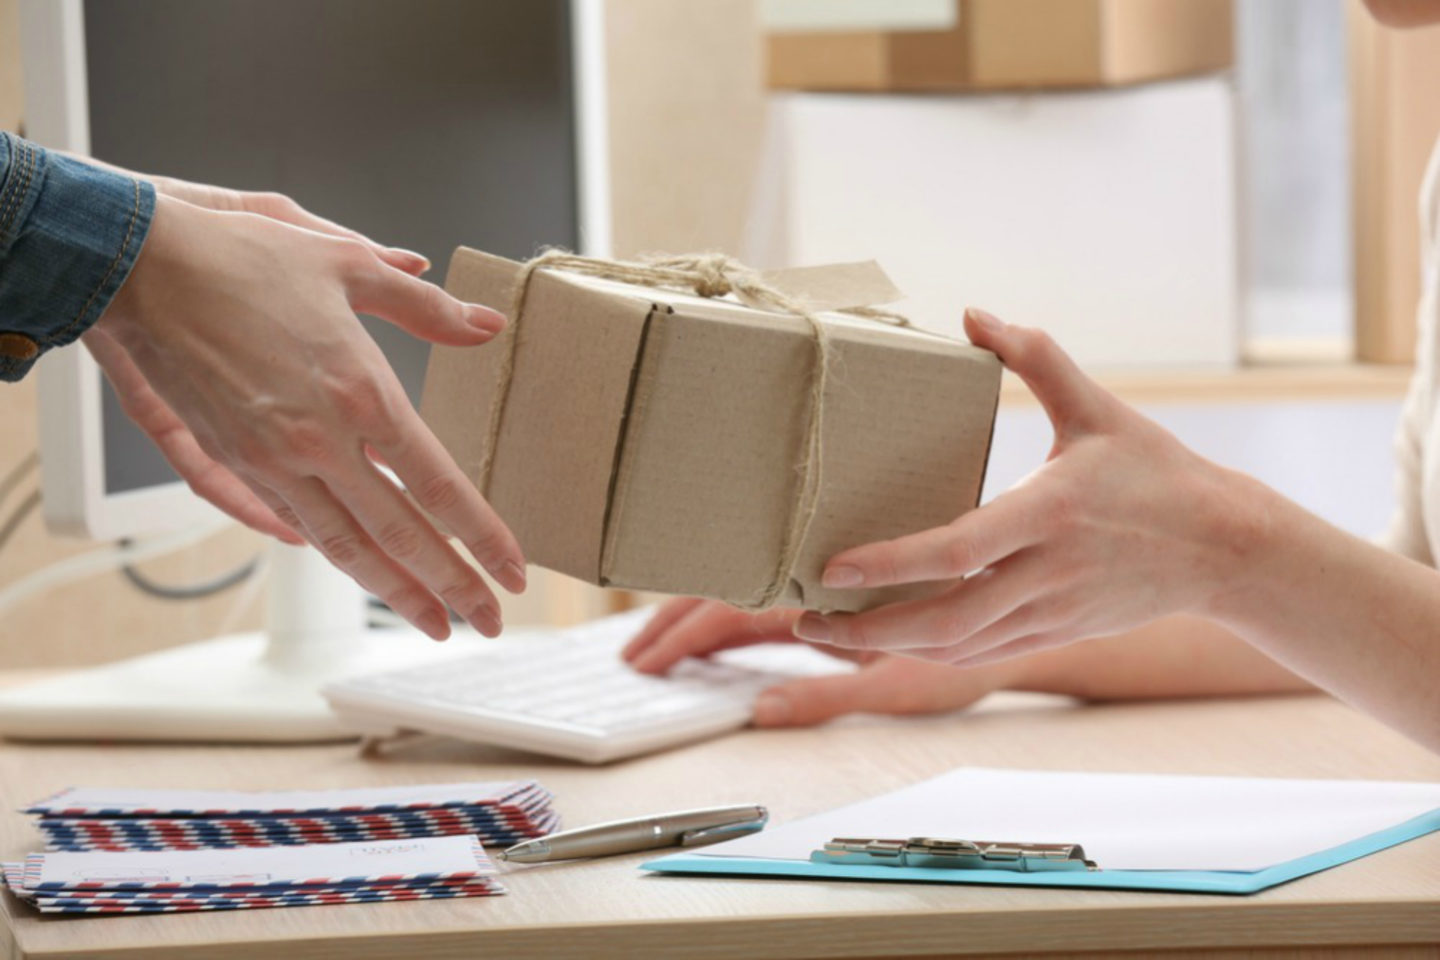 How To Send Your Parcel To Abroad In Safe Manner?